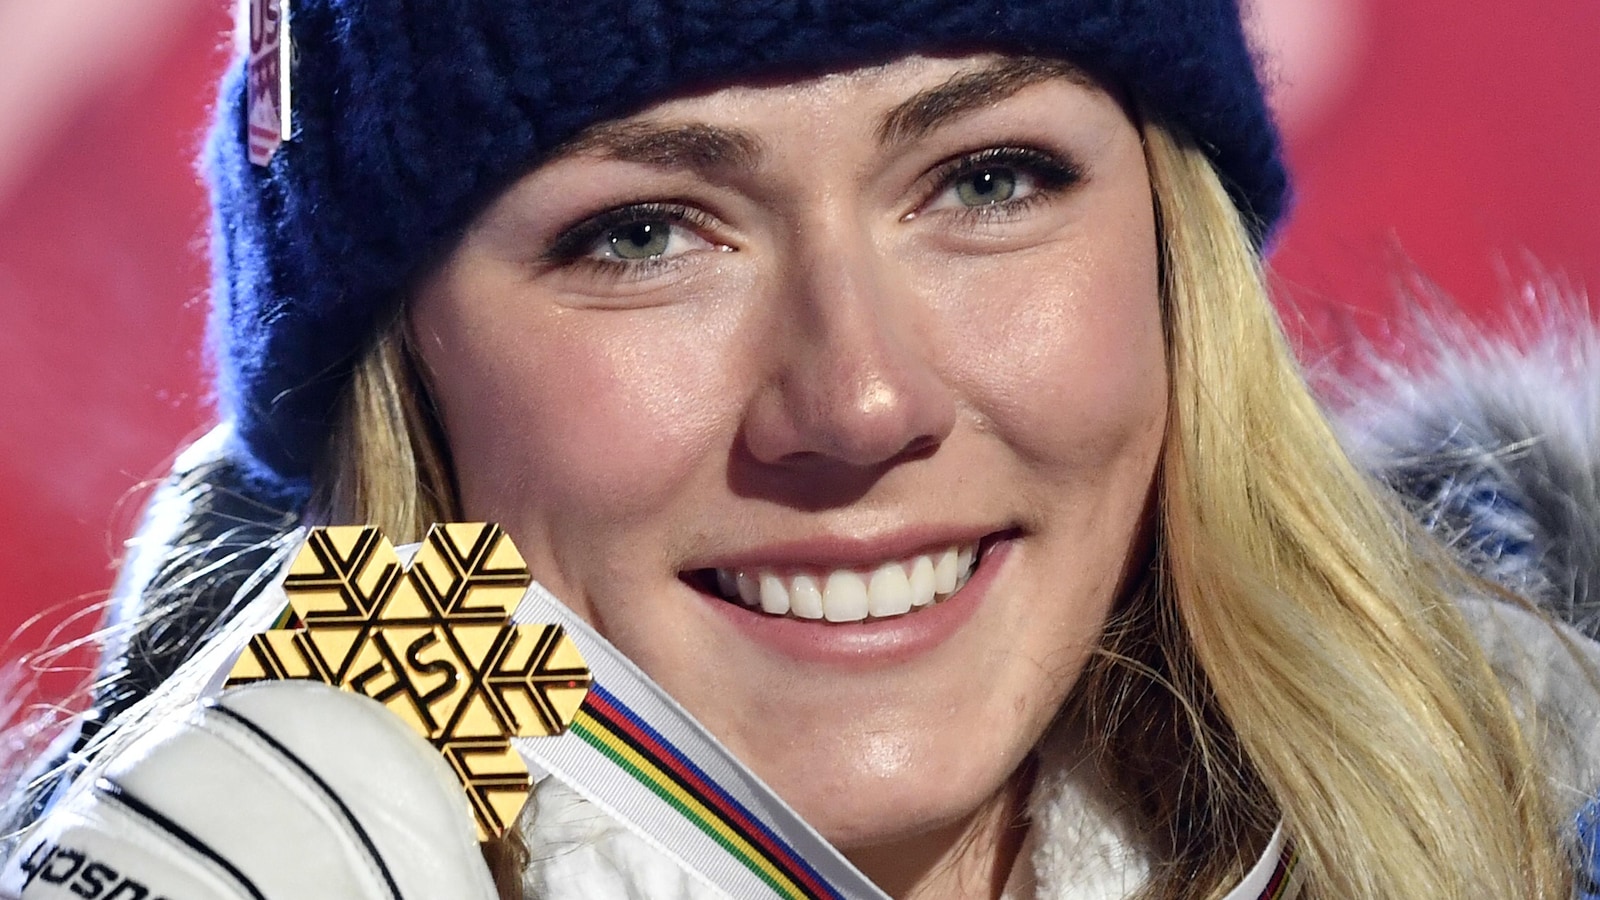 Official fan page of mikaela shiffrin. 